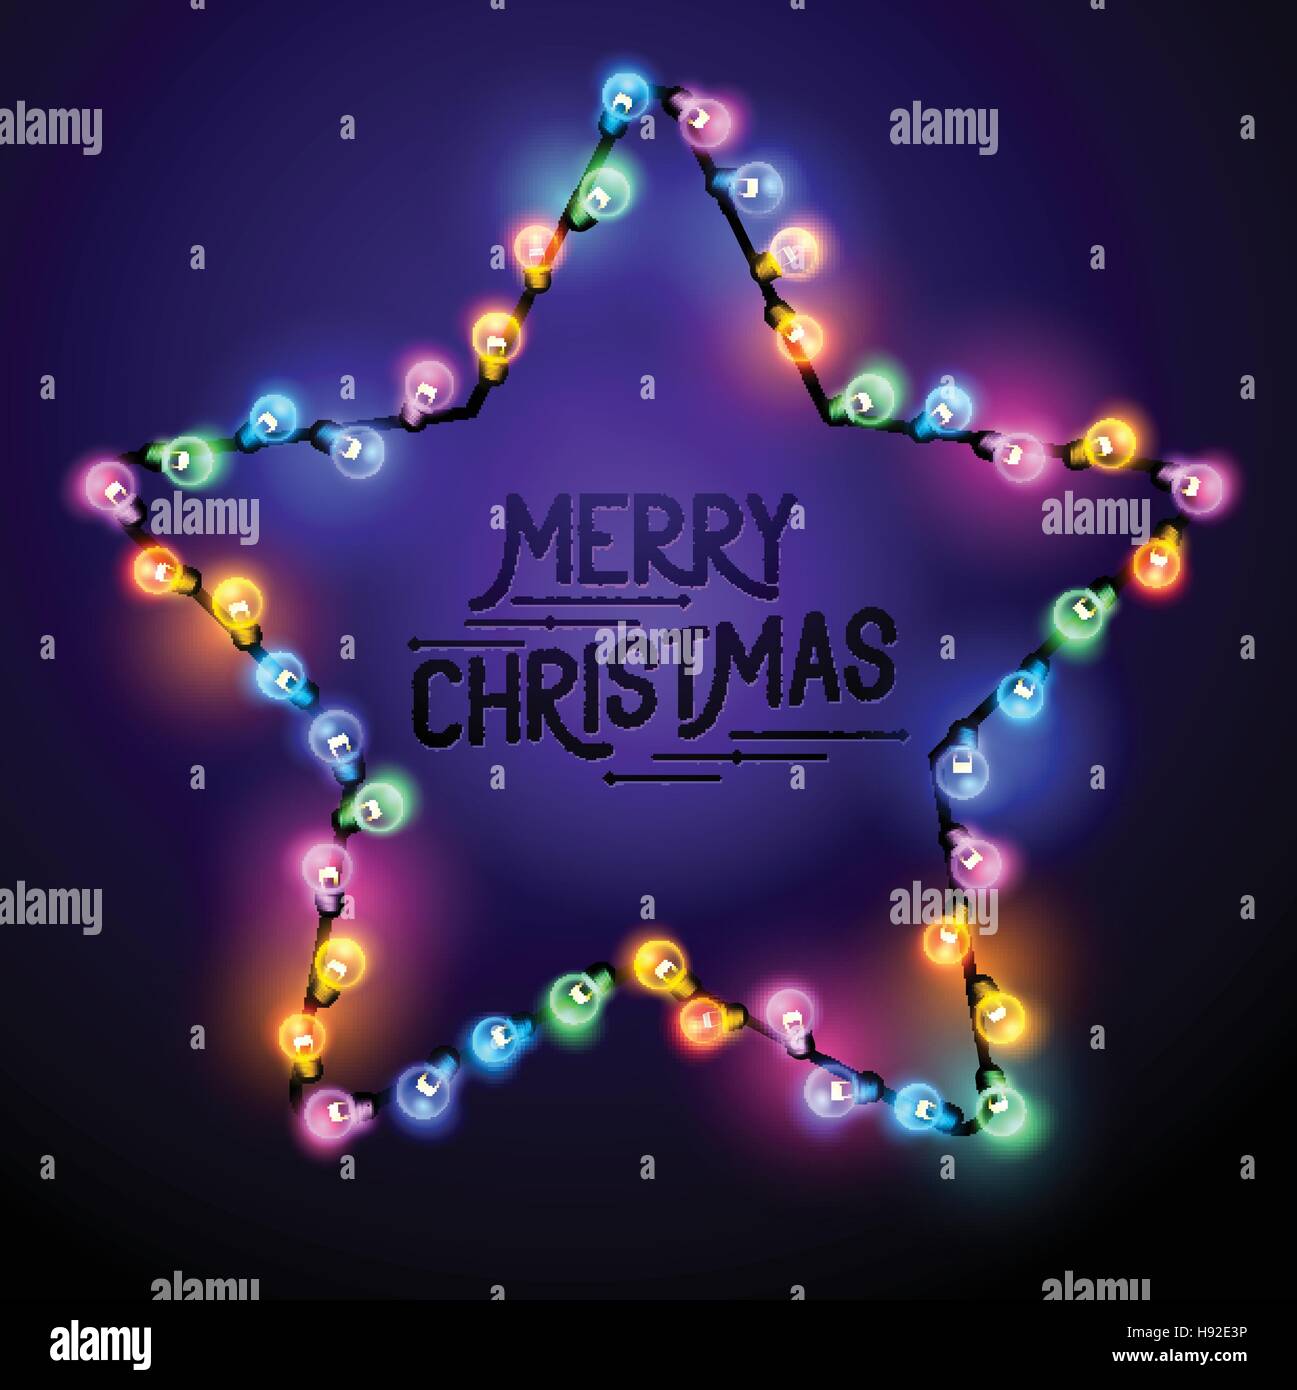 Christmas Star  - Seasonal decorations with colourful lights and Merry Christmas text. Vector illustration. Stock Vector